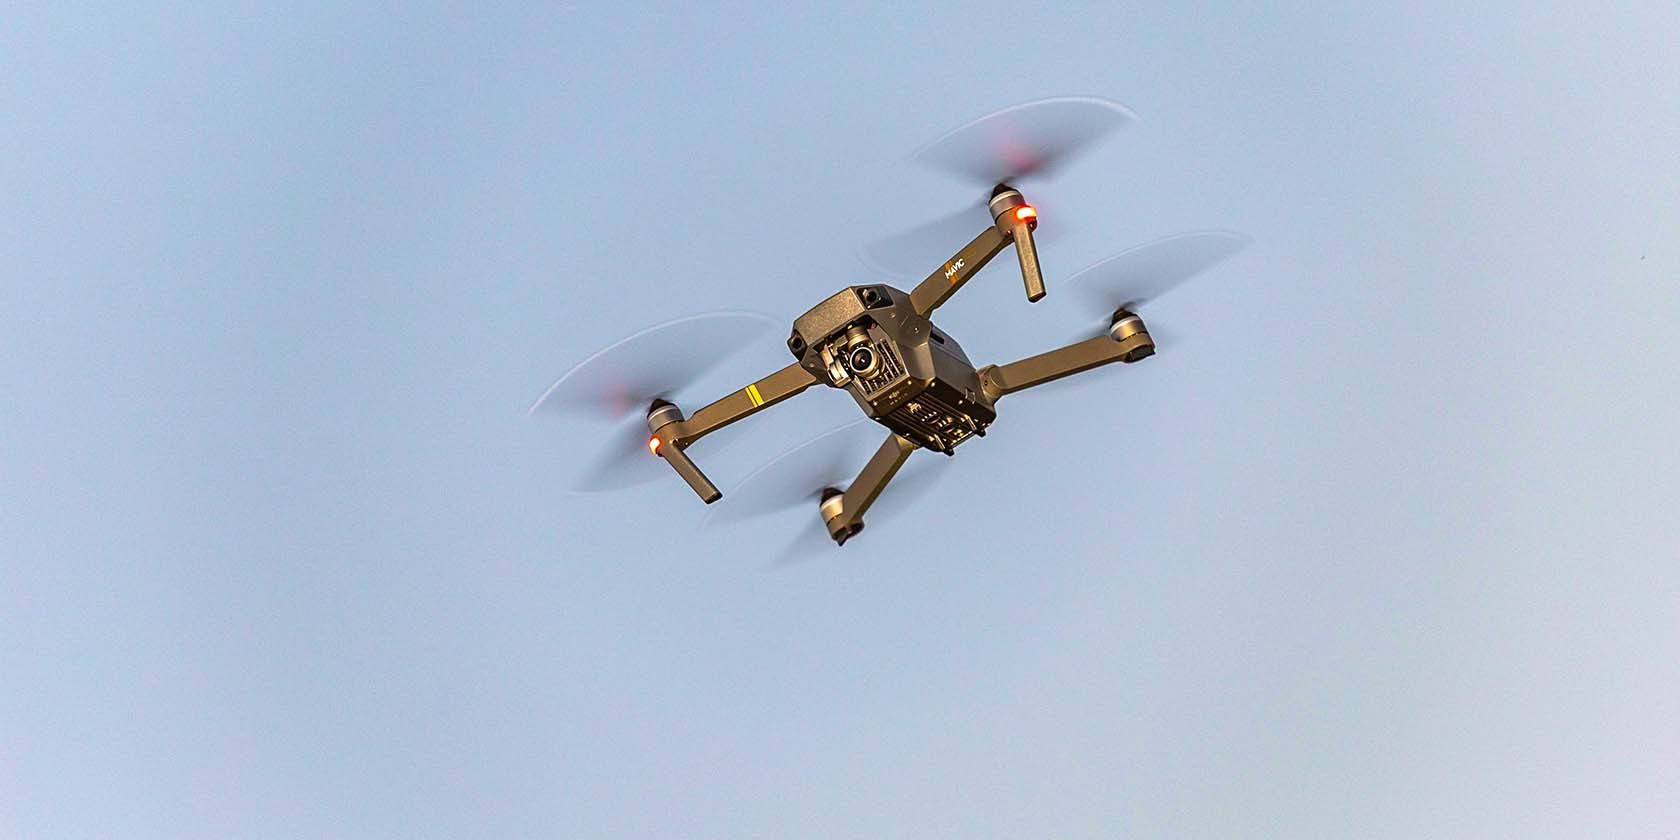 A Quadcopter in flight.